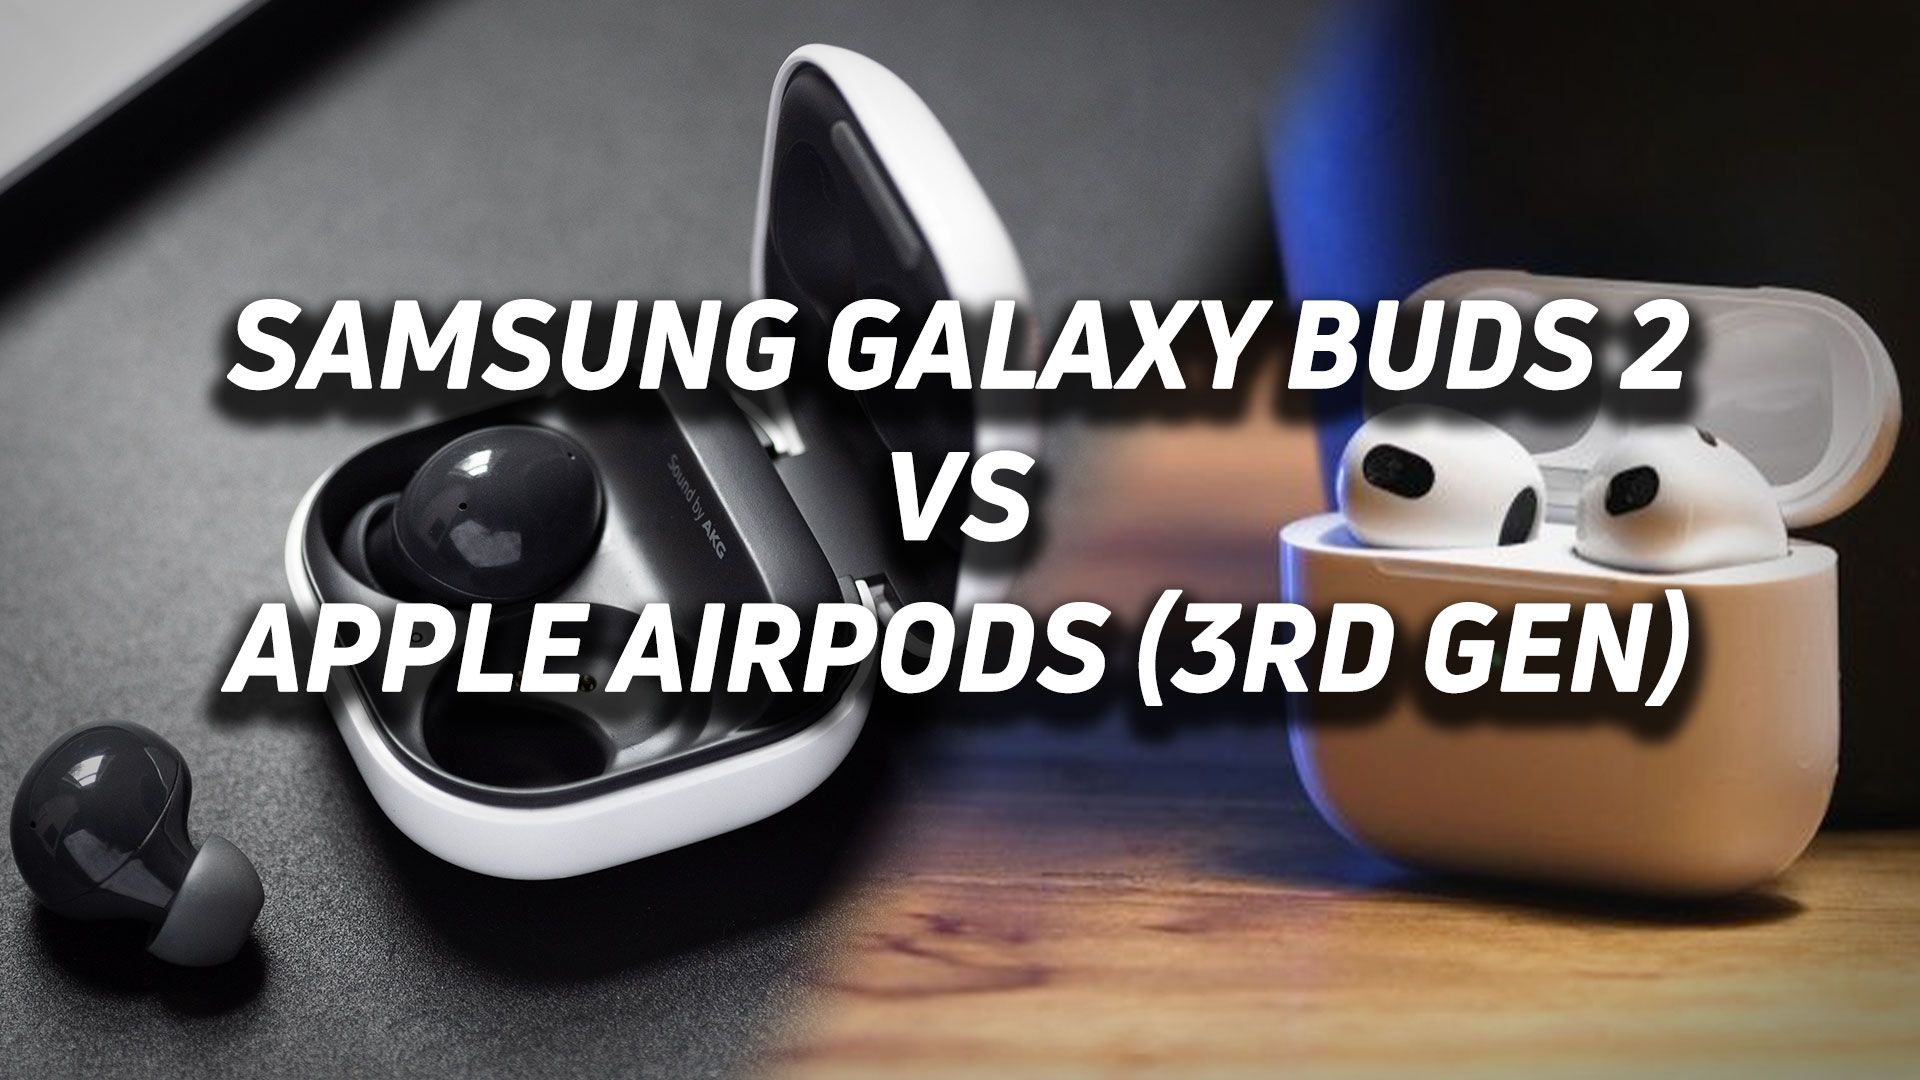 Image showing Samsung Galaxy Buds 2 on the left and Apple AirPods (3rd generation) on the right